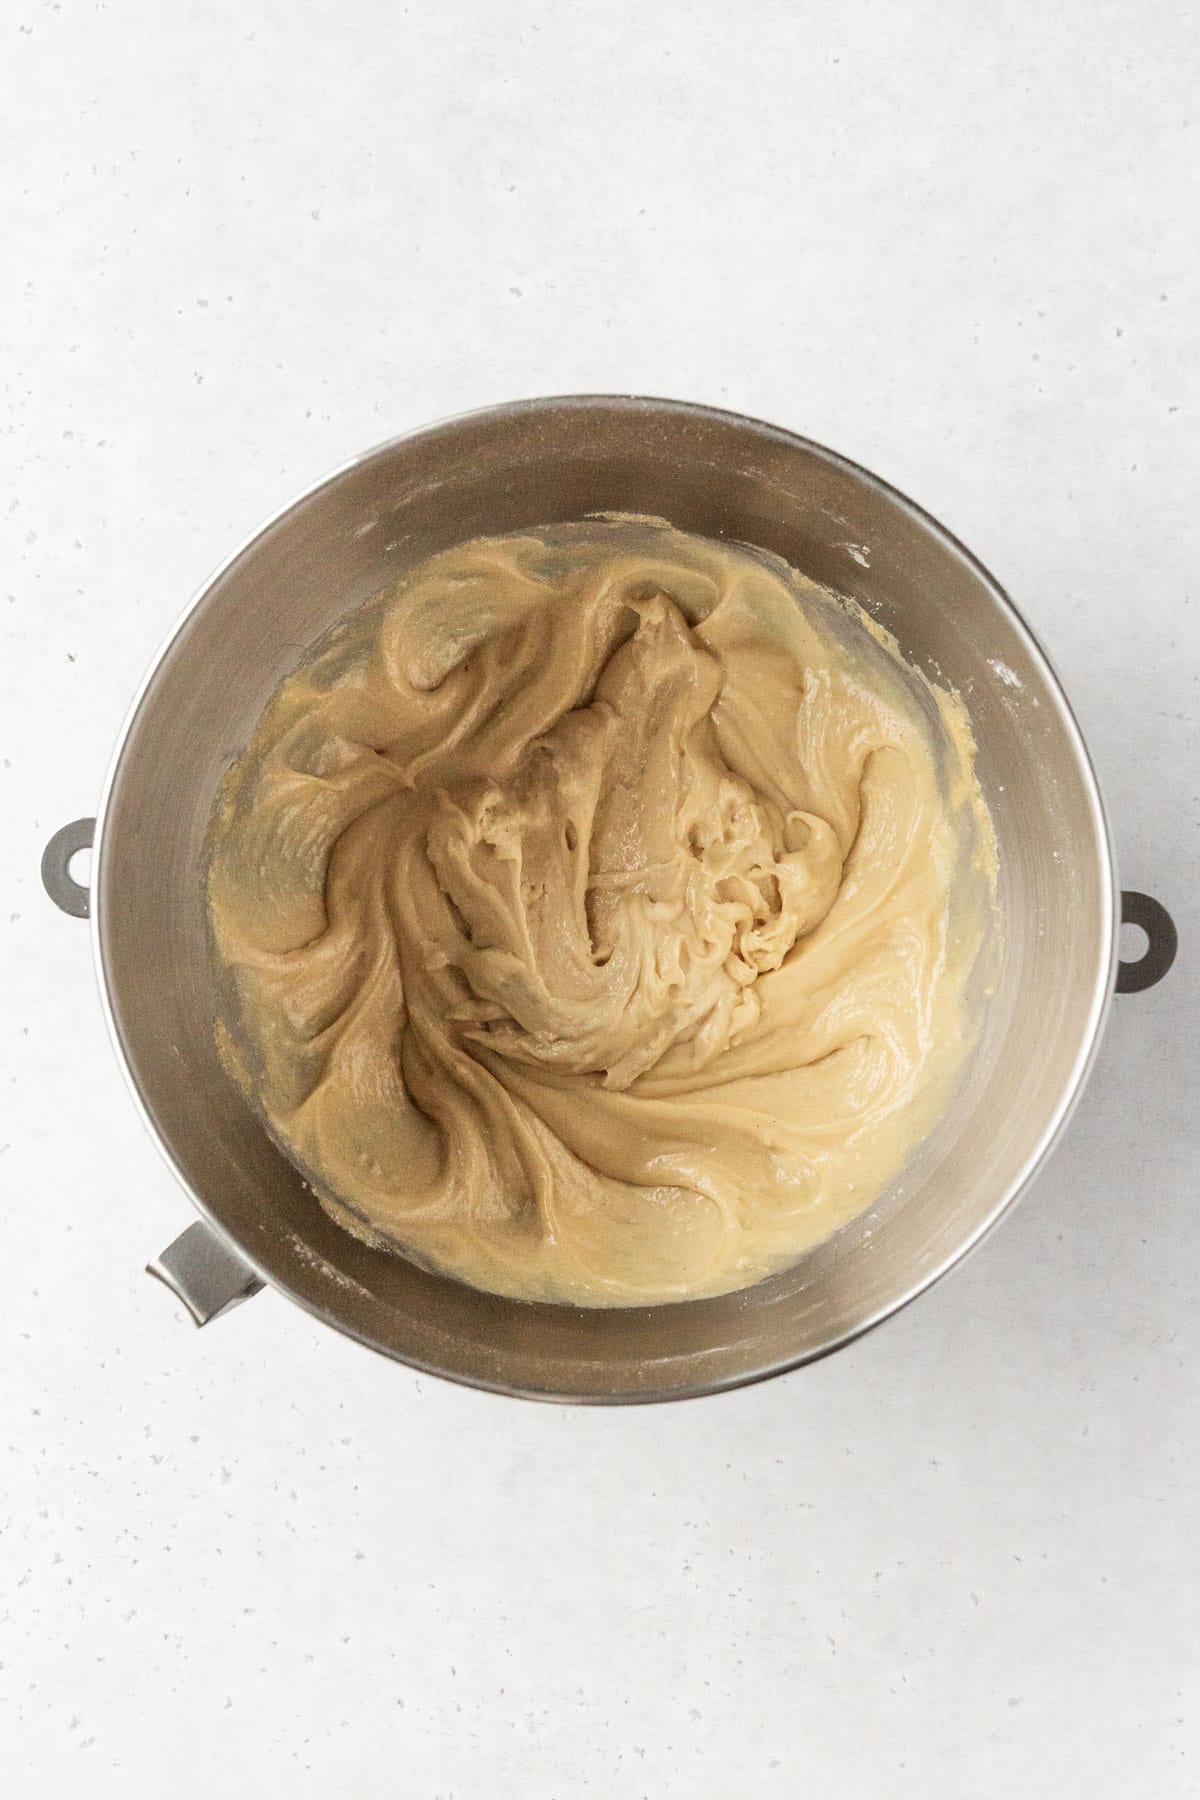 Gluten-free coffee cake batter after combining wet and dry ingredients.